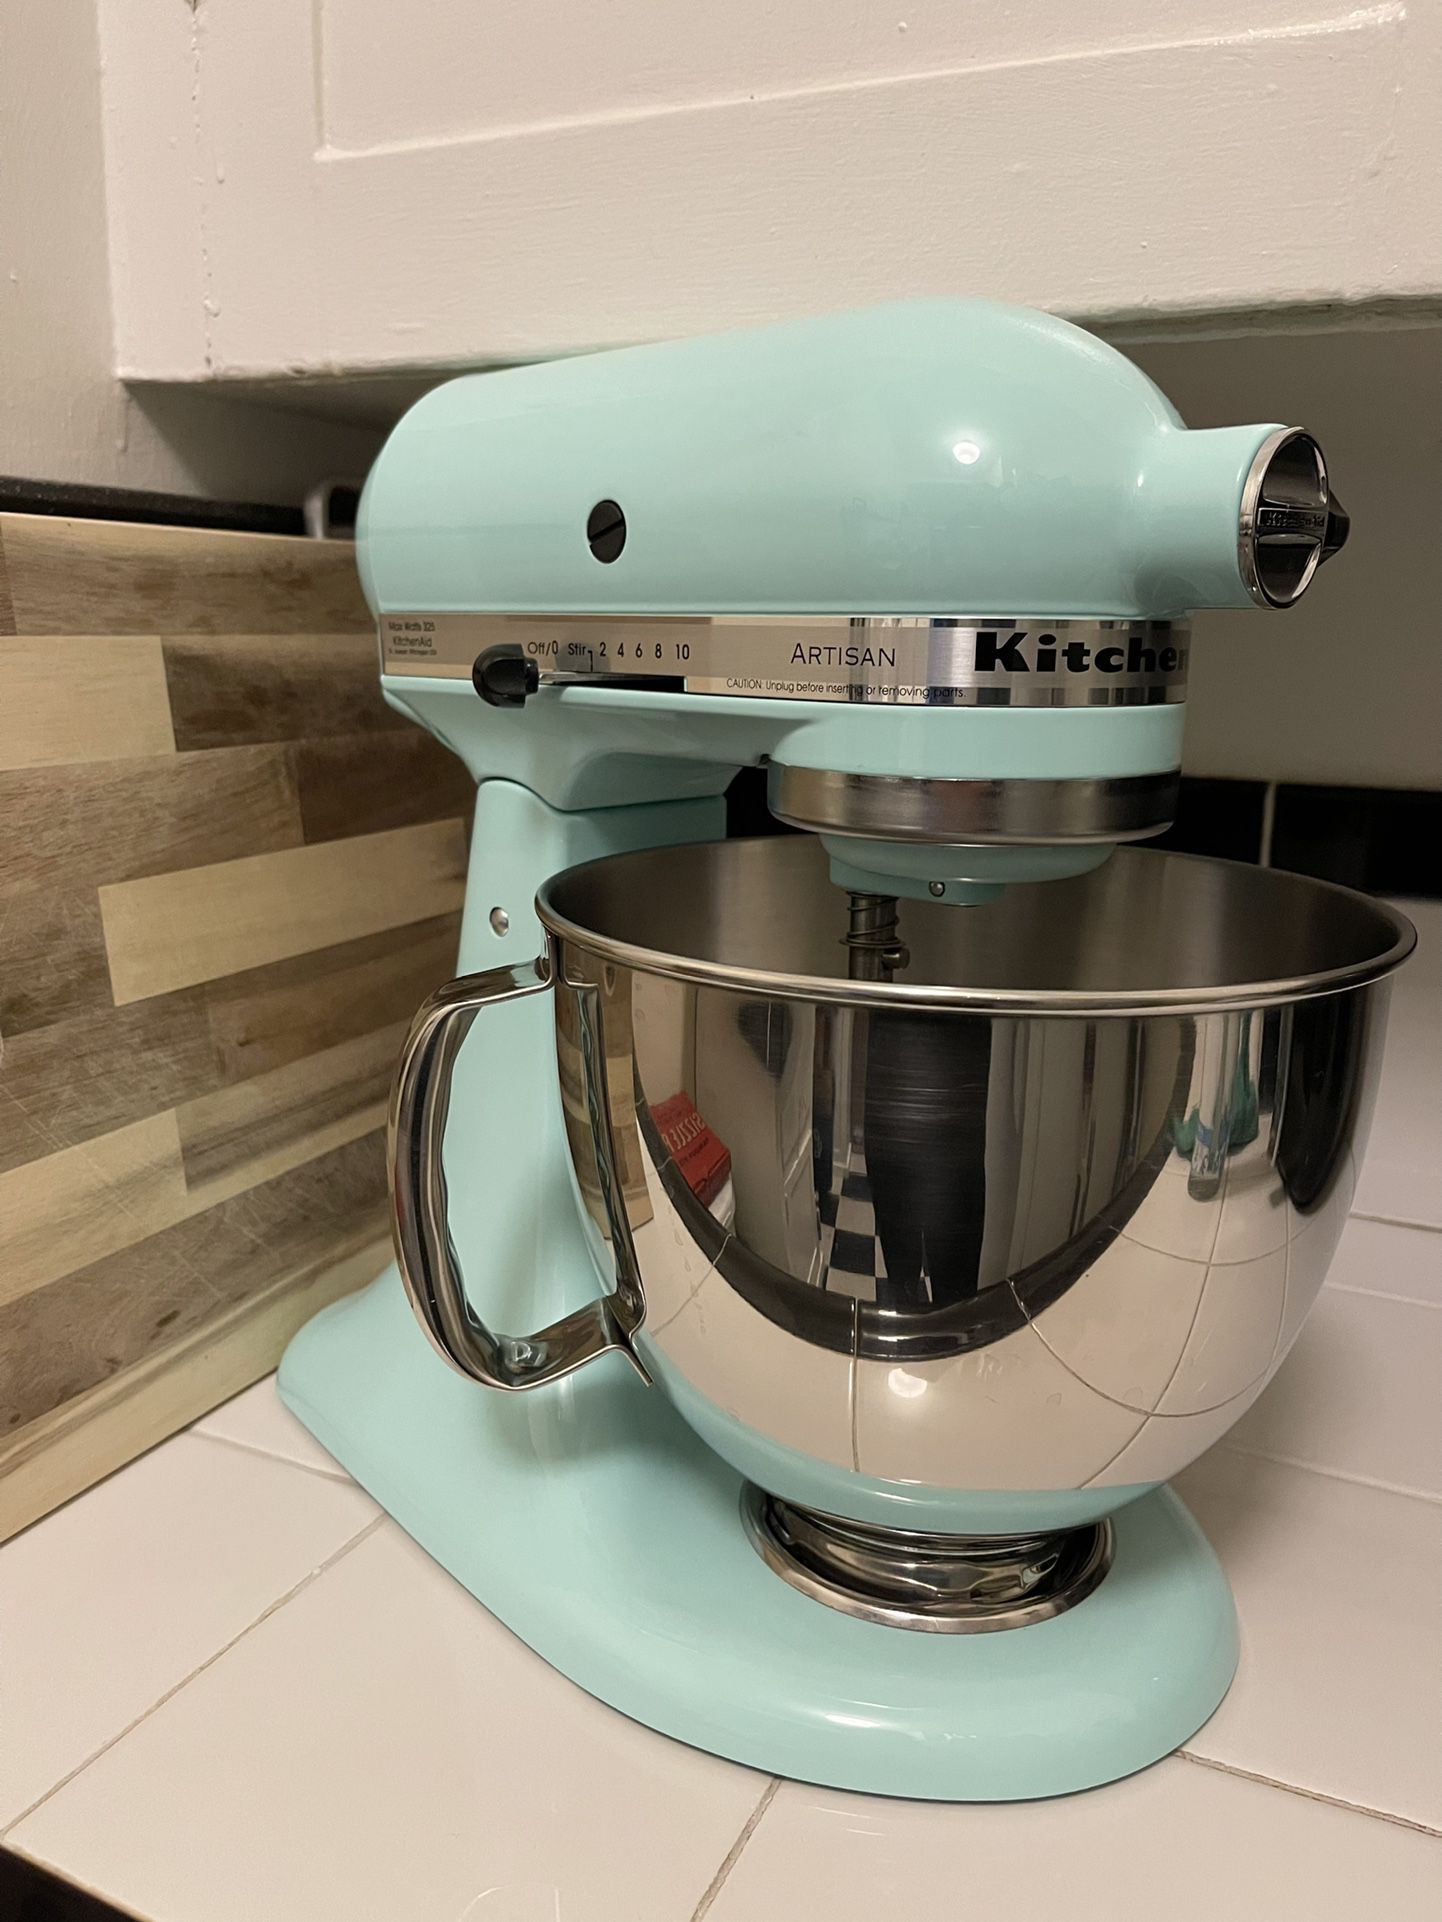 kitchenAid Sifter + Scale for Sale in Elk Grove, CA - OfferUp